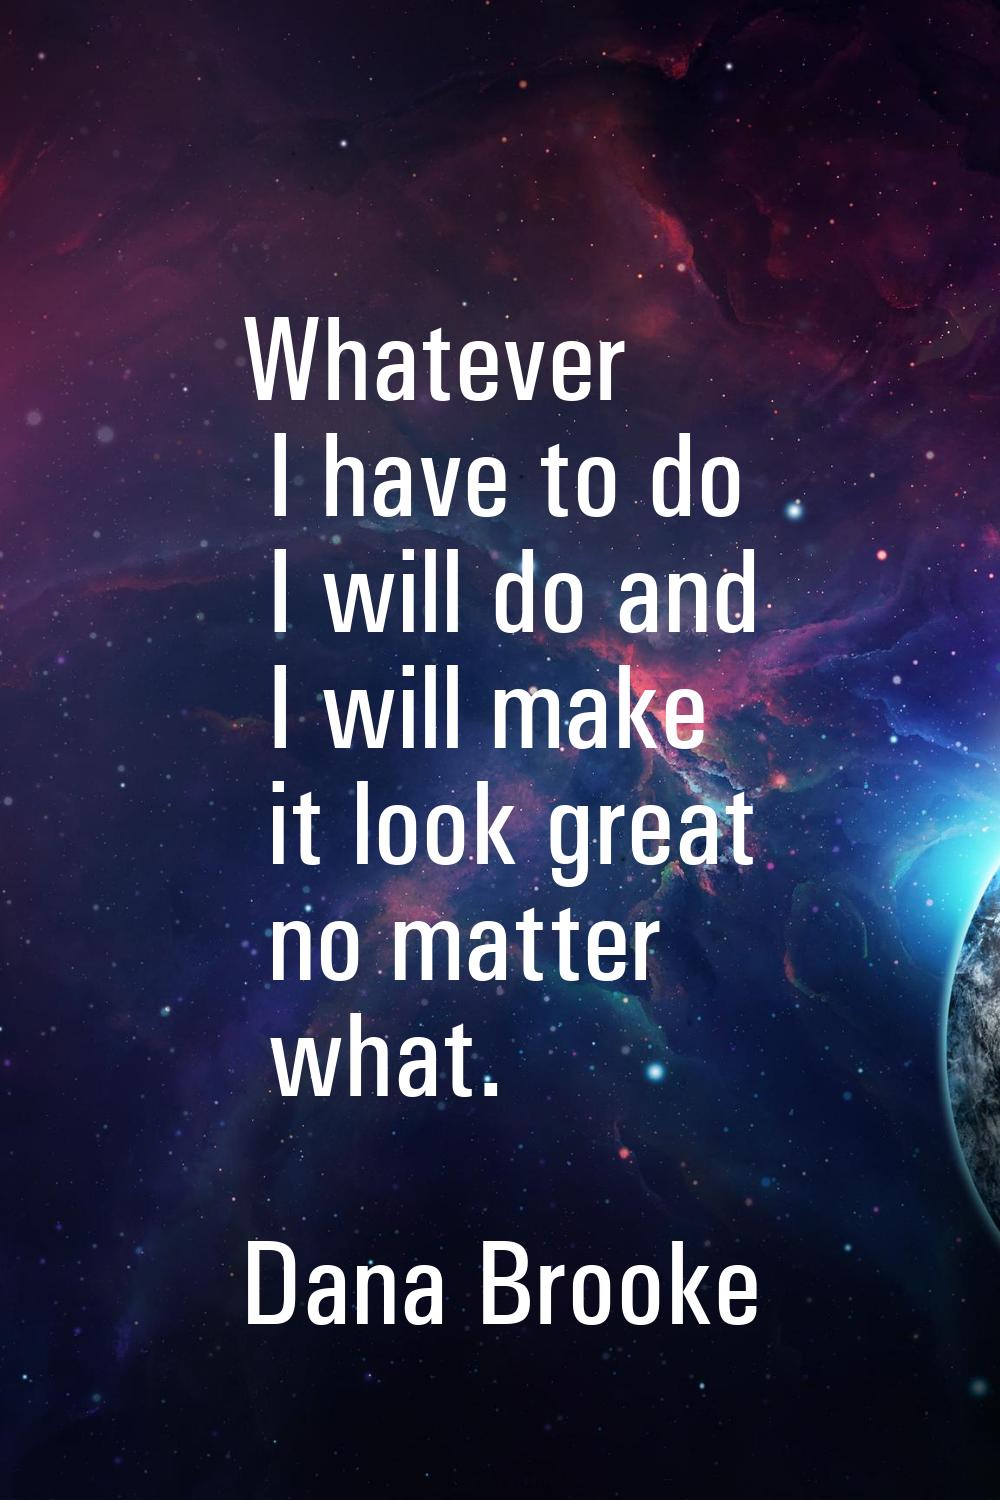 Whatever I have to do I will do and I will make it look great no matter what.